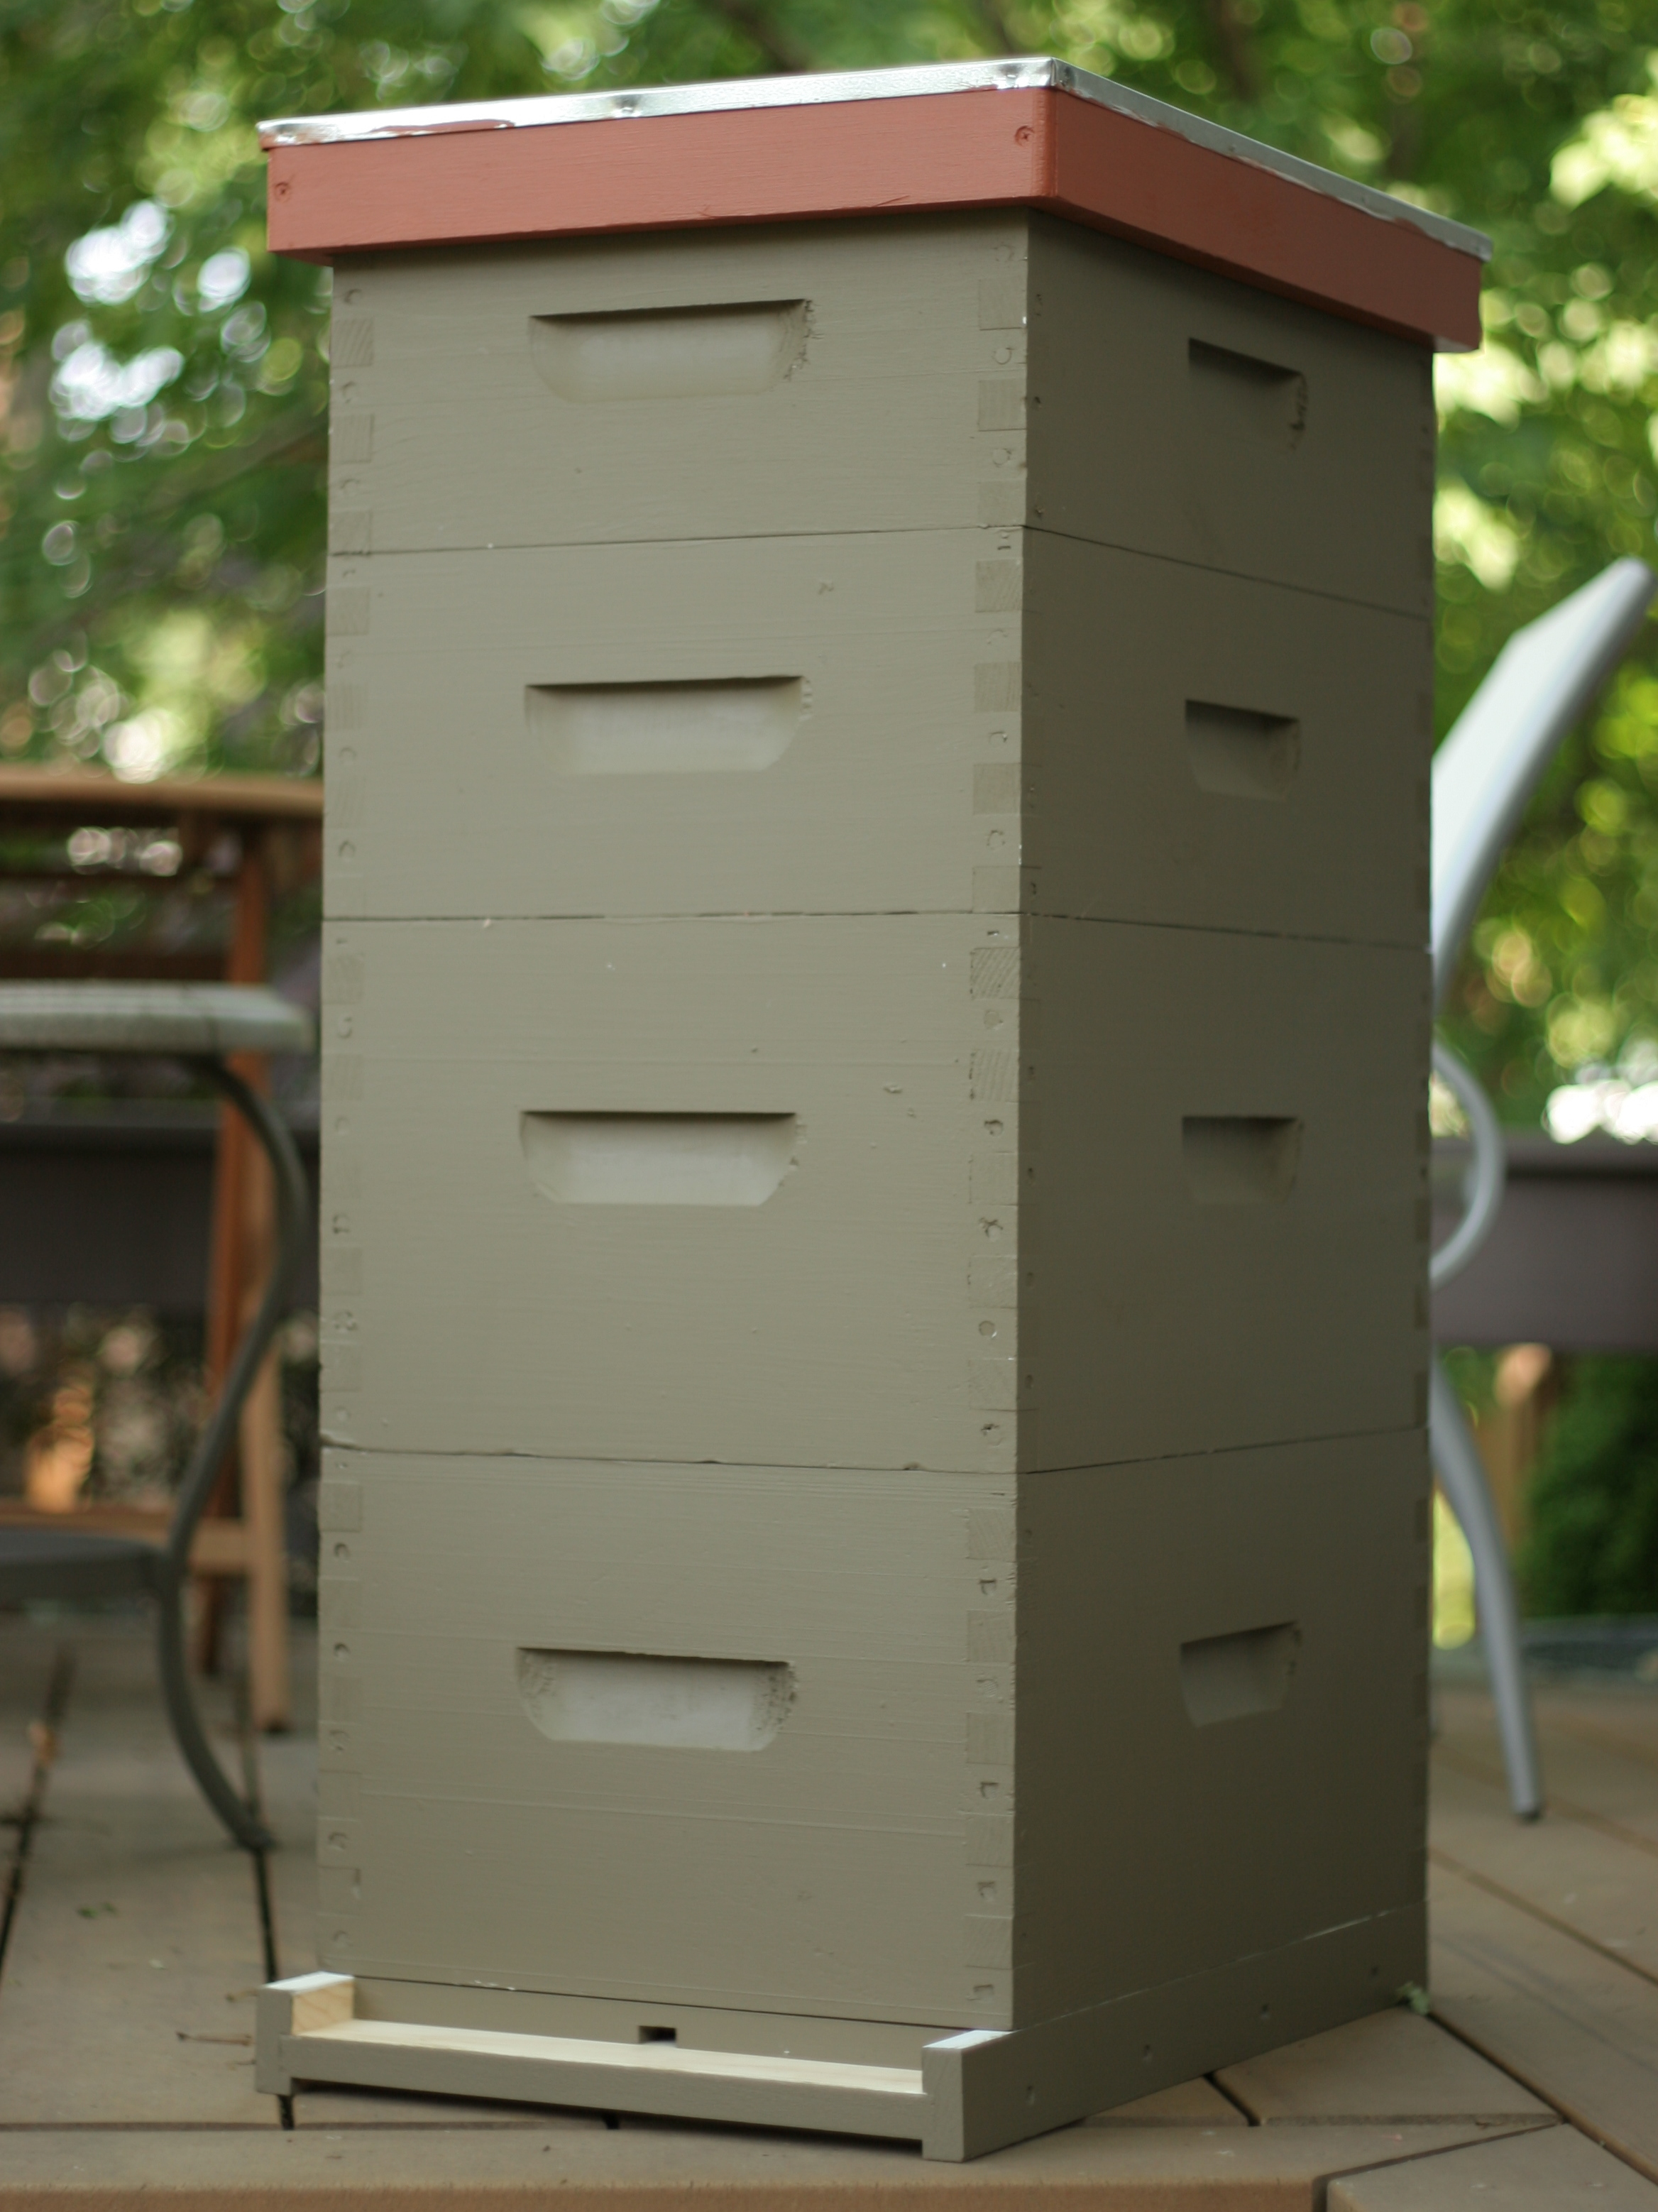 8 Frame Langstroth Hive Dimensions